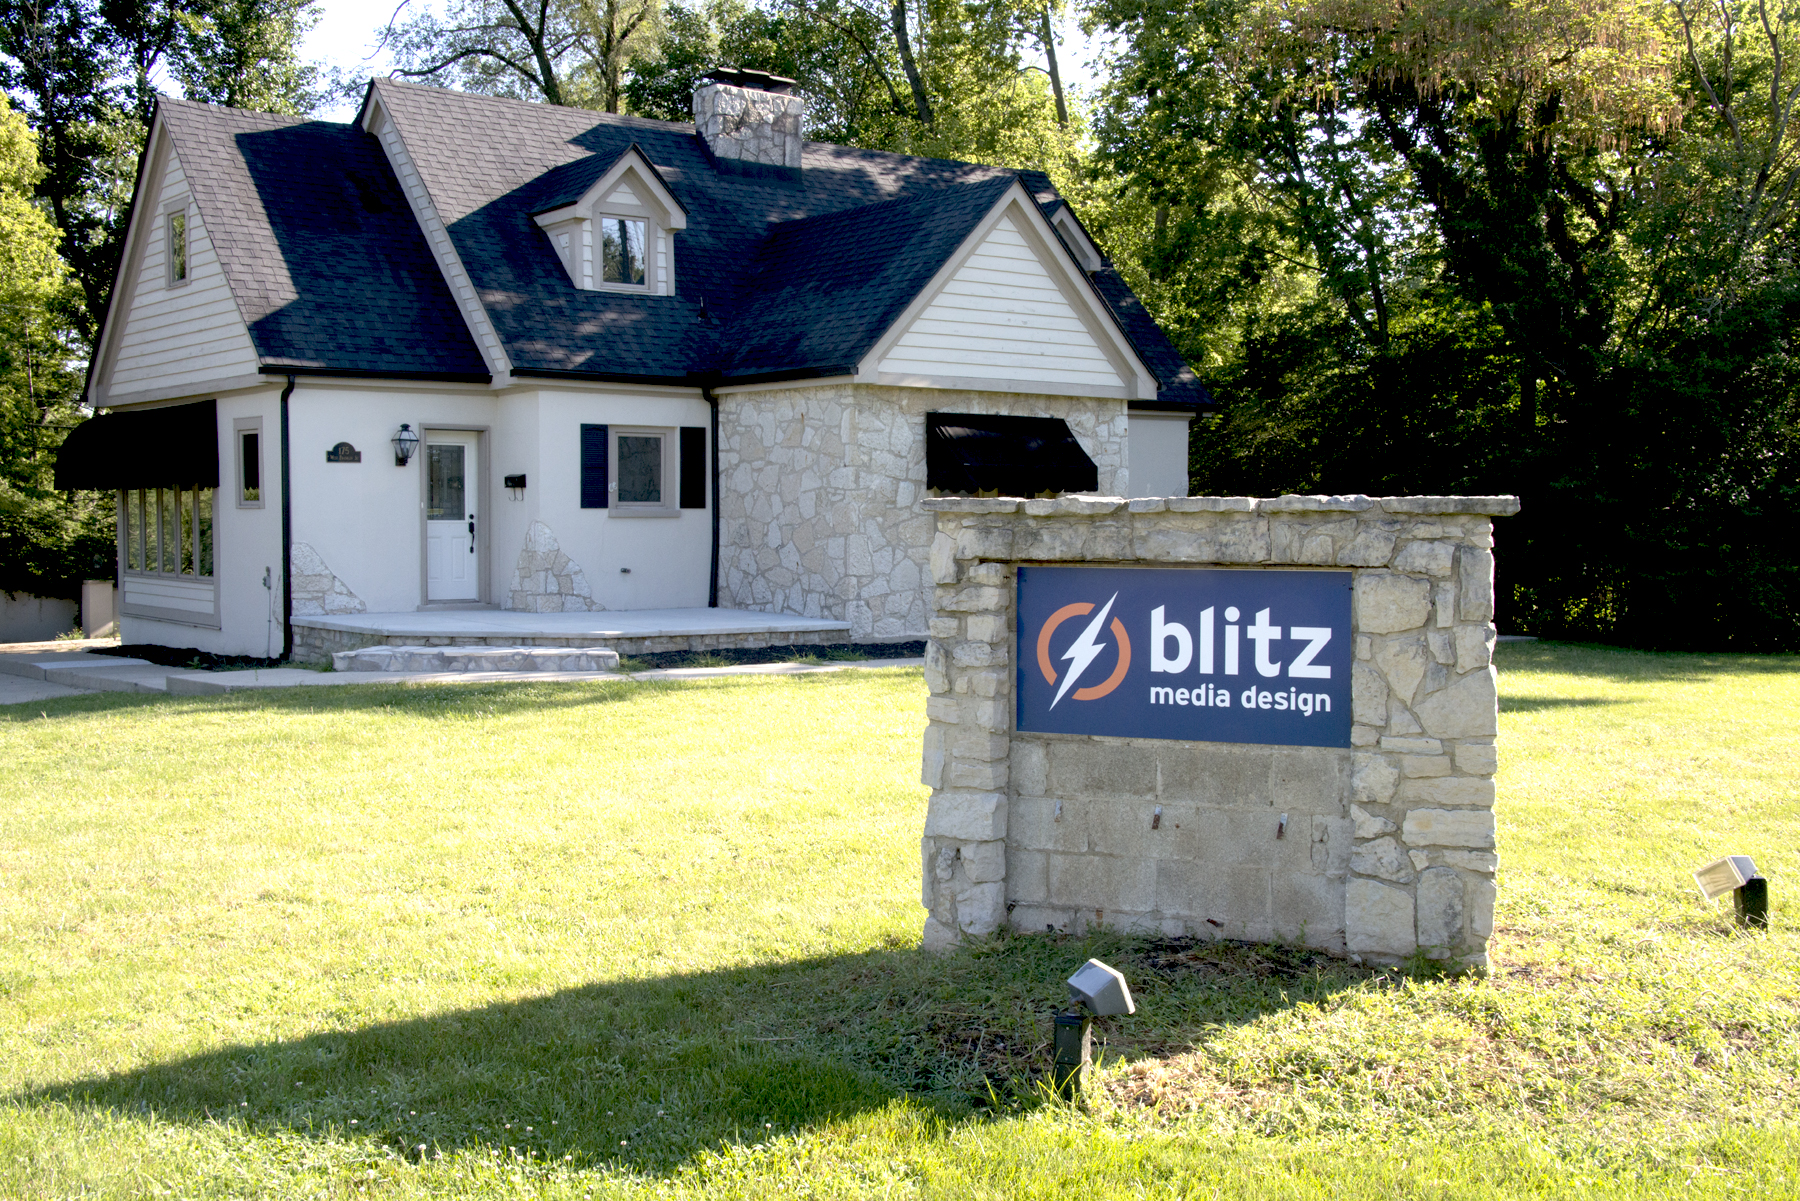 Ohio digital marketing and website design firm Blitz Media Design has opened a new office in the Dayton area